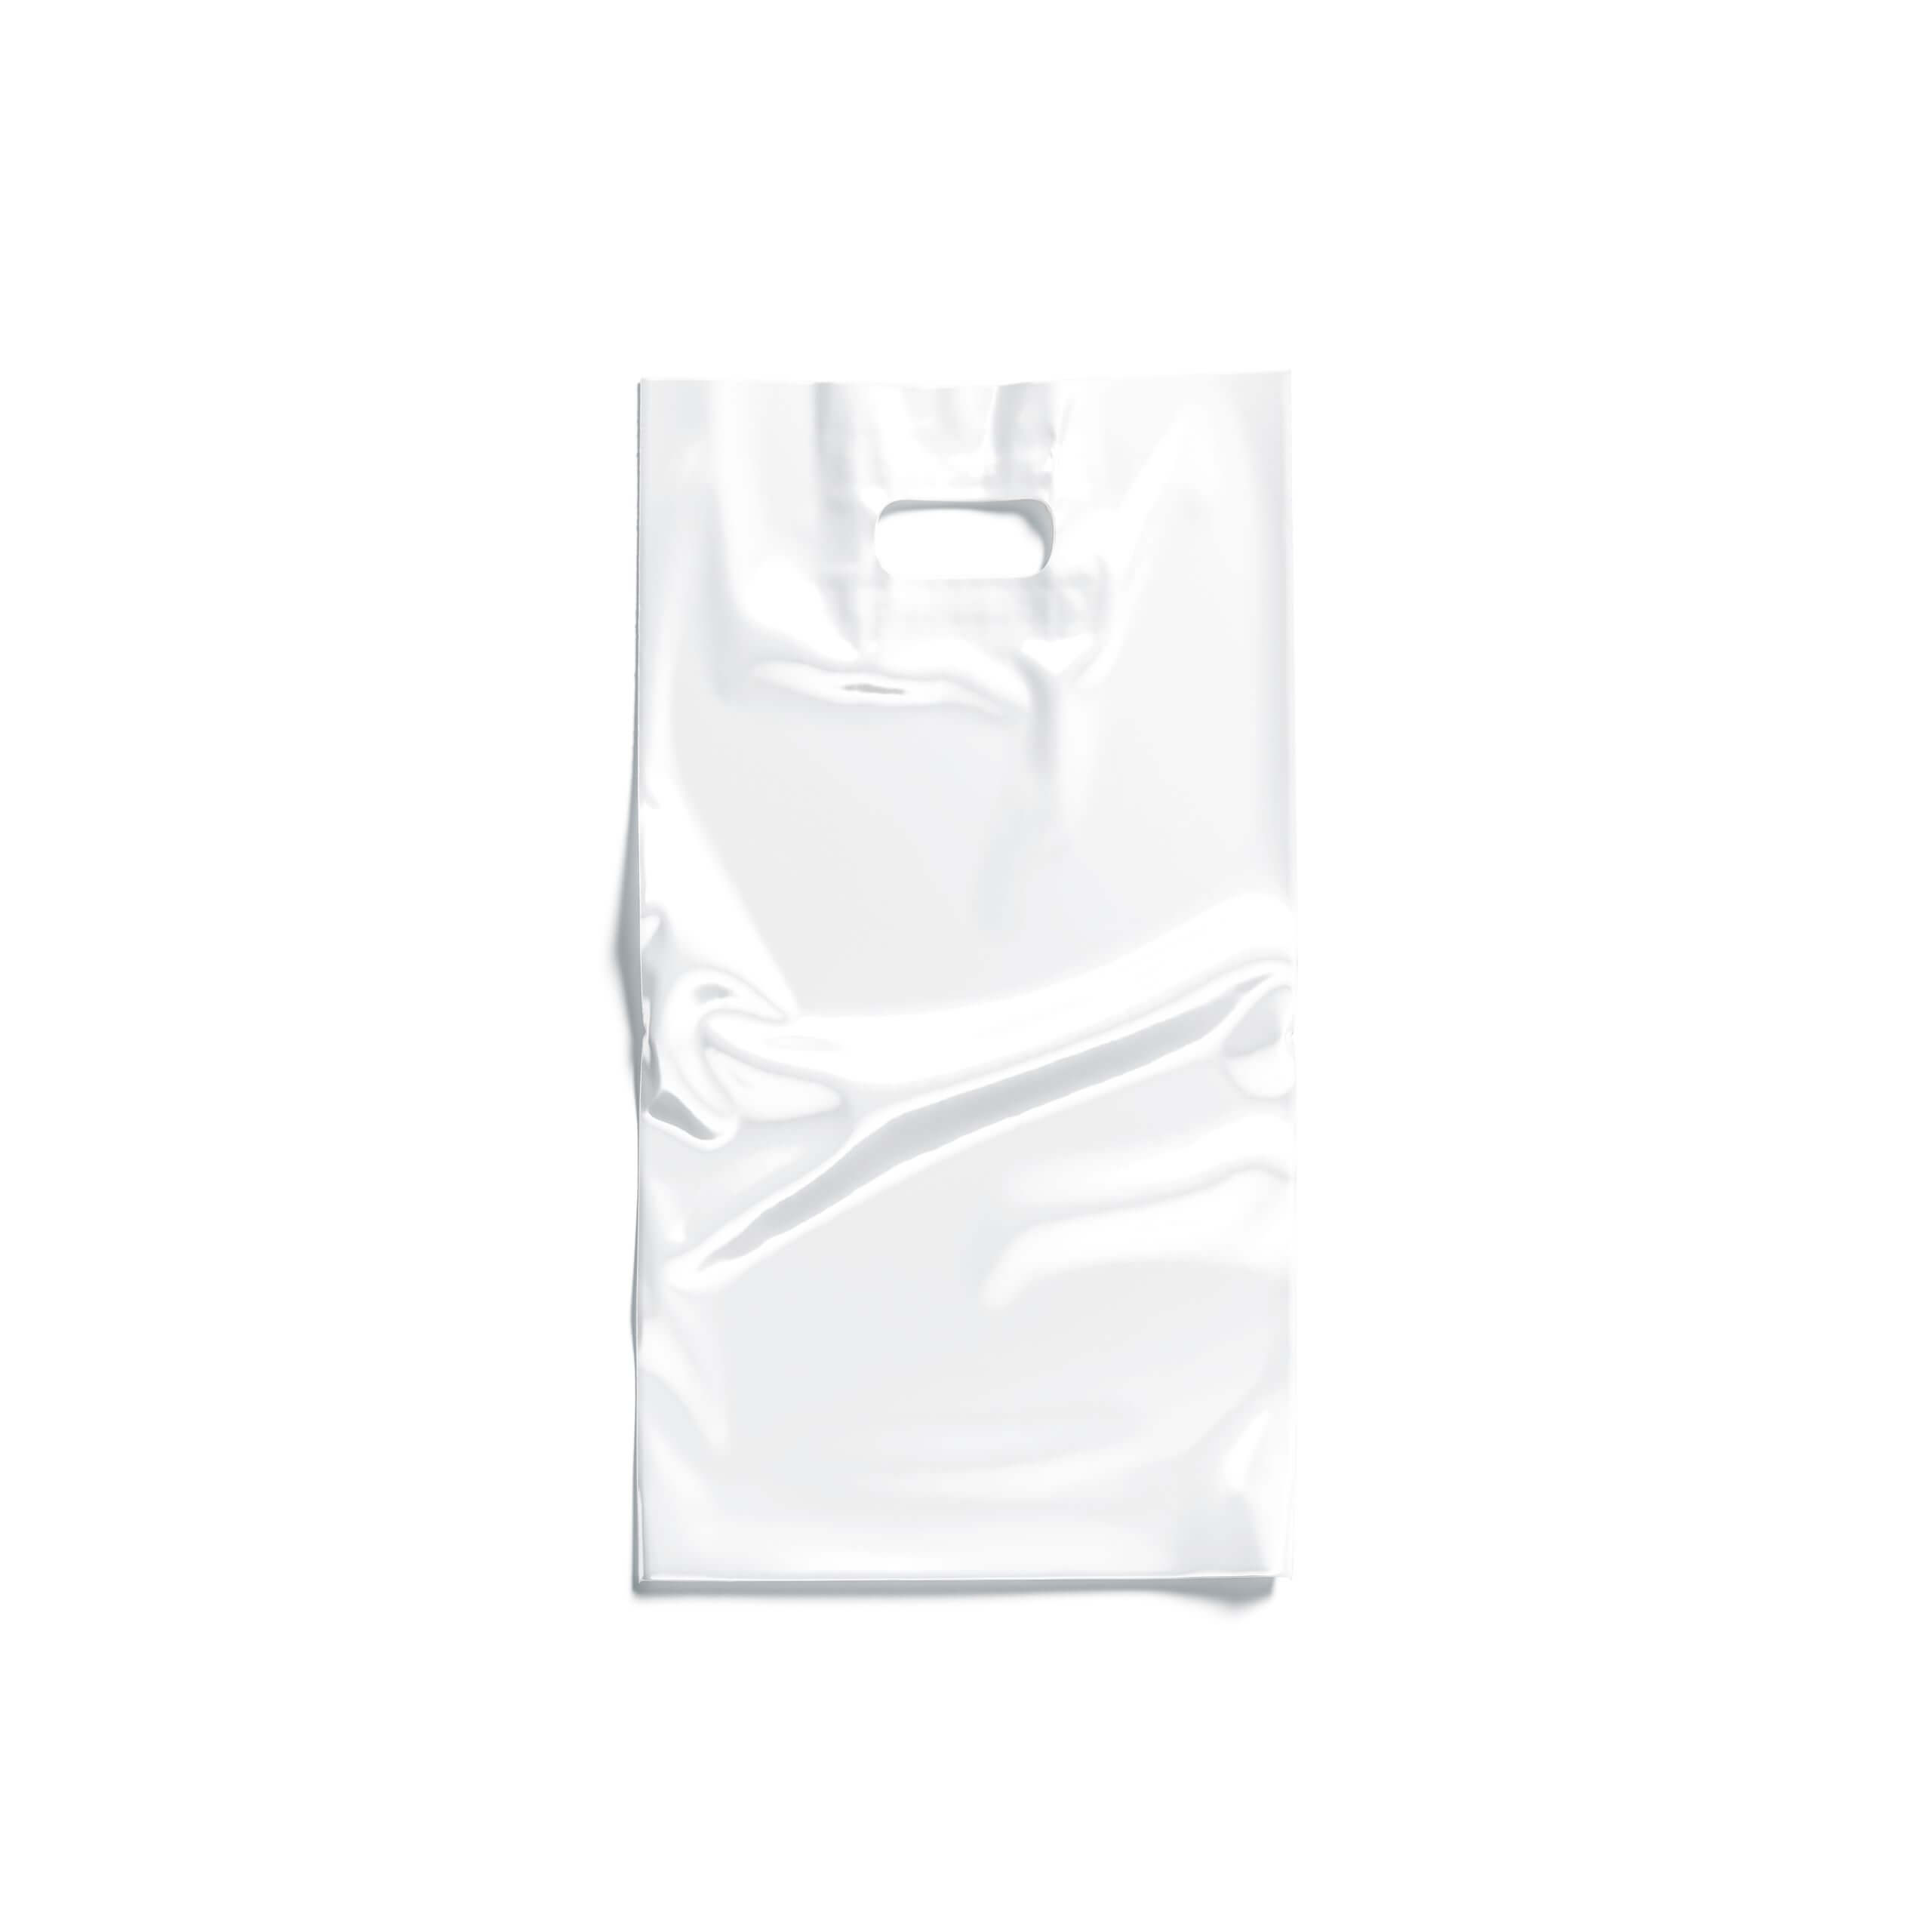 An image of our Punched Handle Carrier Bags.